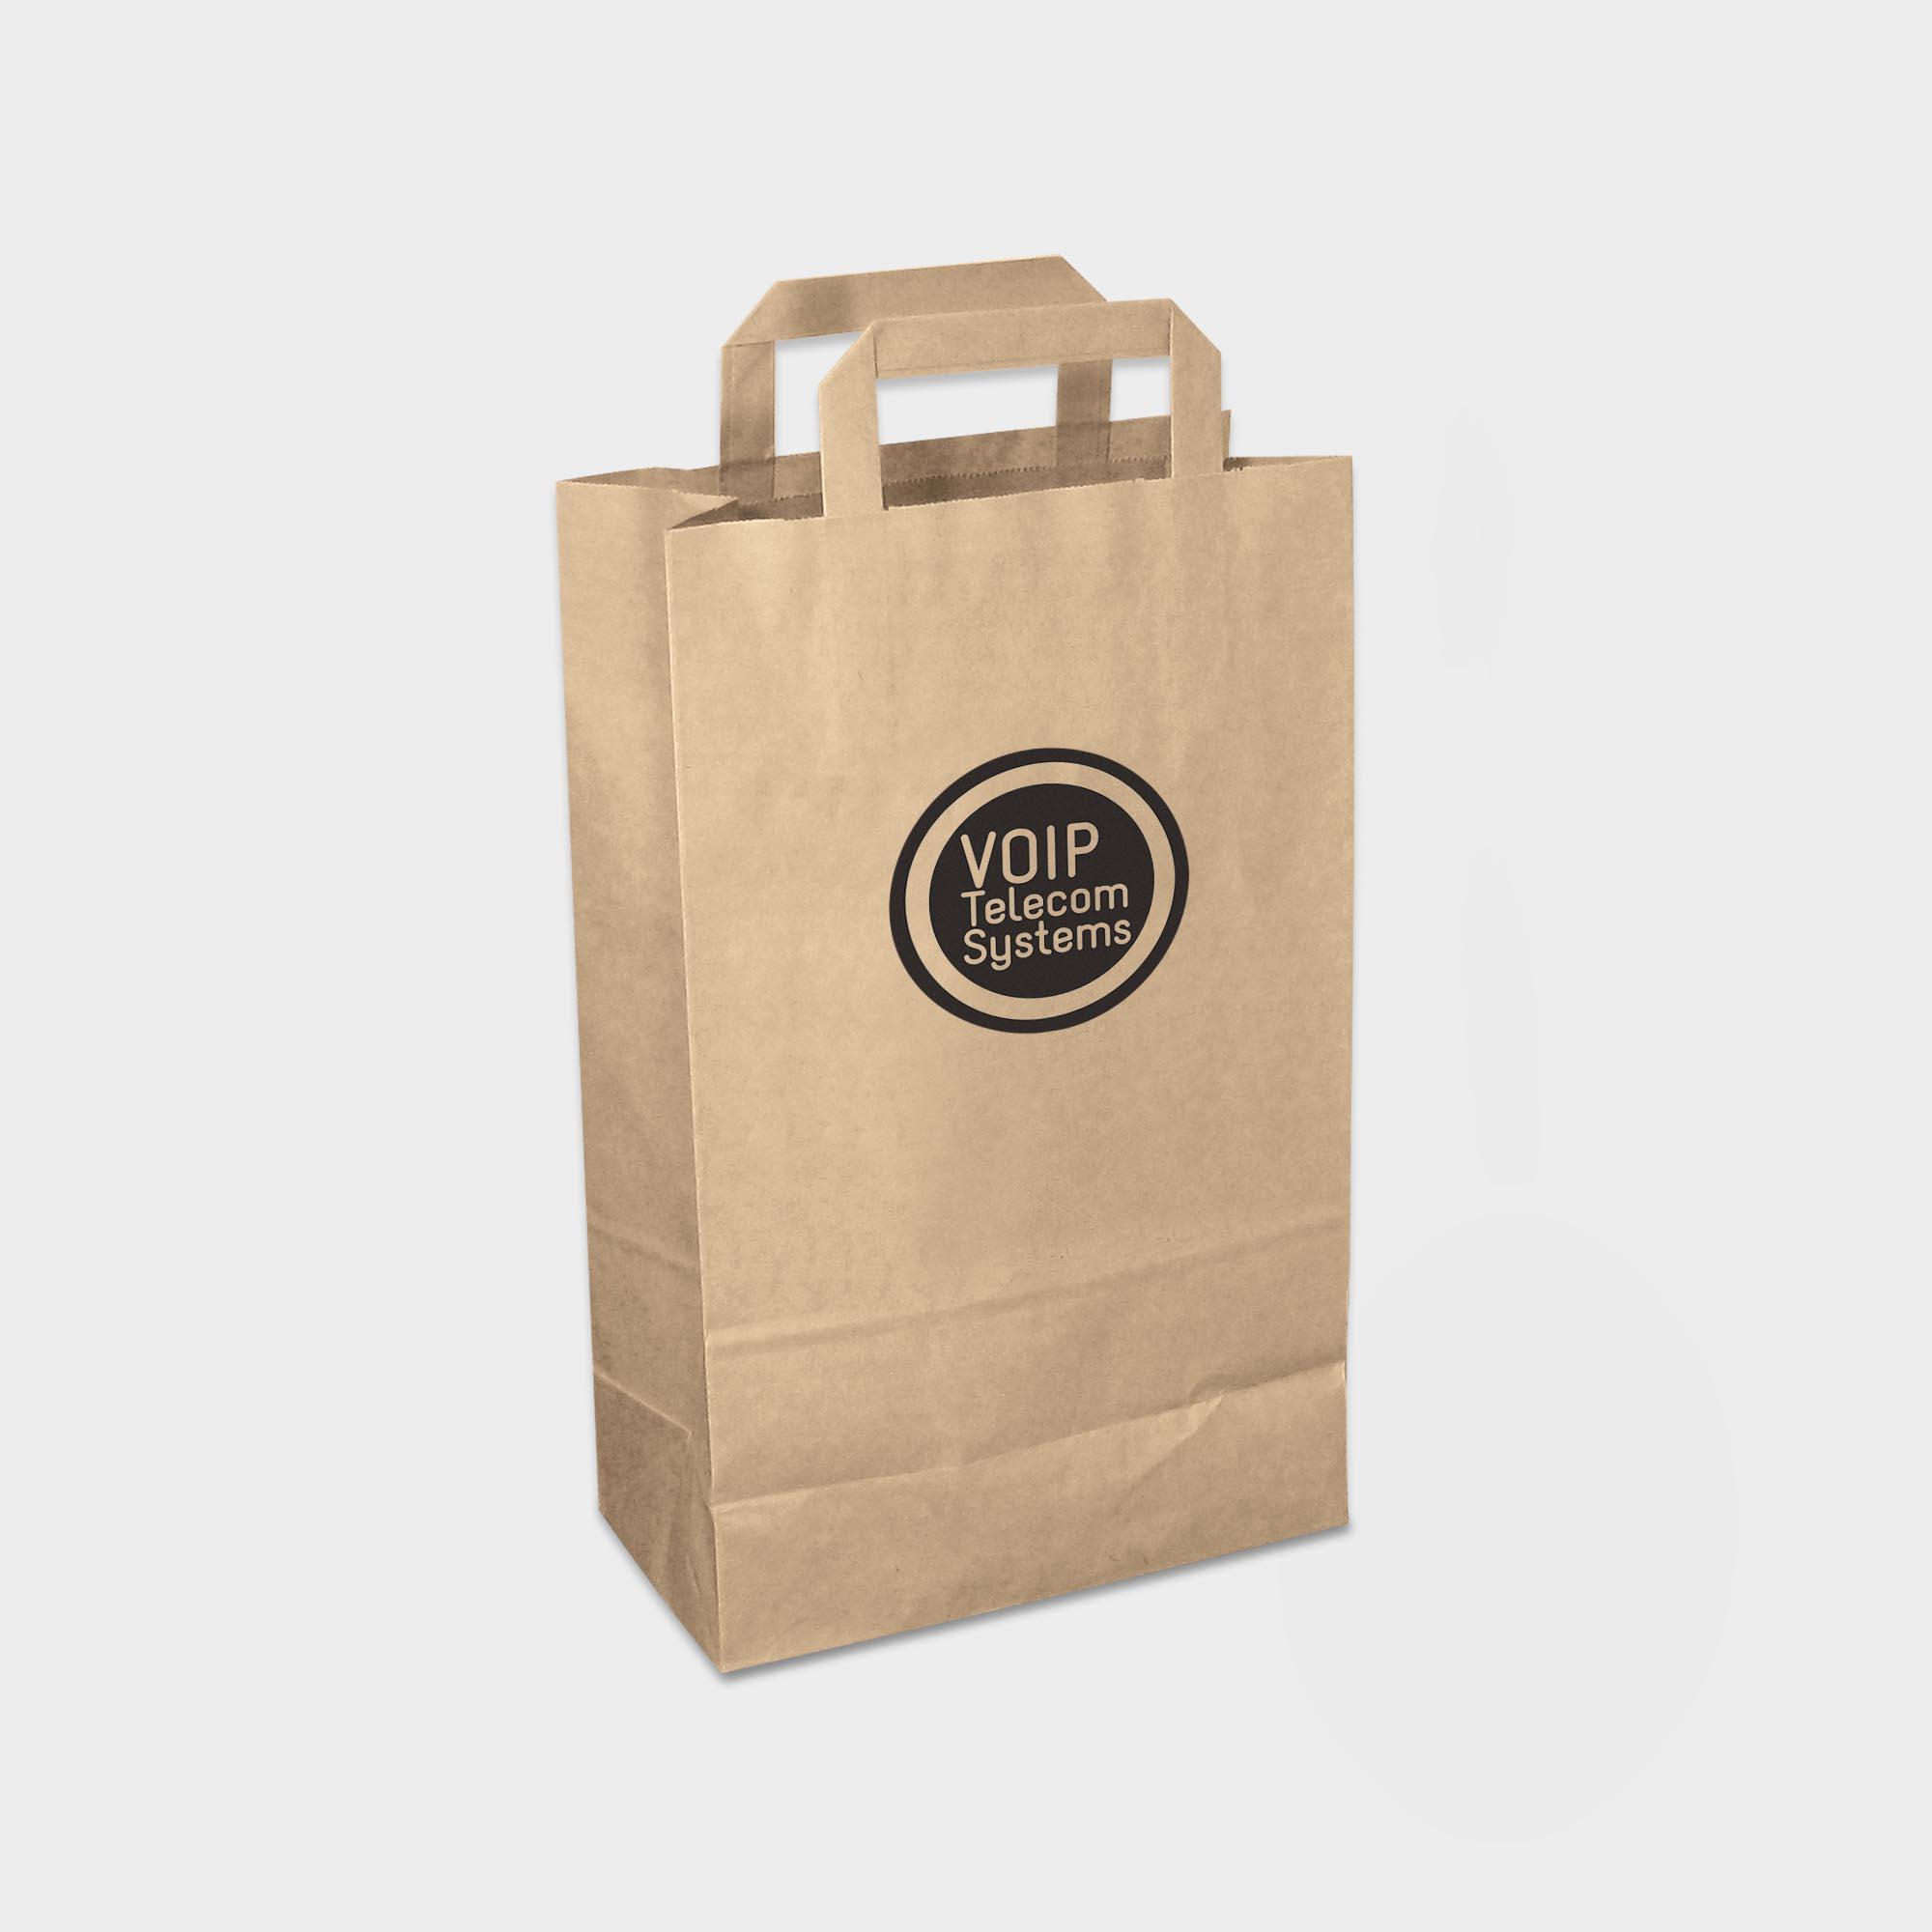 The Green & Good Recycled Paper Carrier Medium is made from recycled paper. It comes as standard with flat tape handles and is only available in brown. Made in the EU, it is great for give-aways and sturdy enough for groceries. 90gsm.